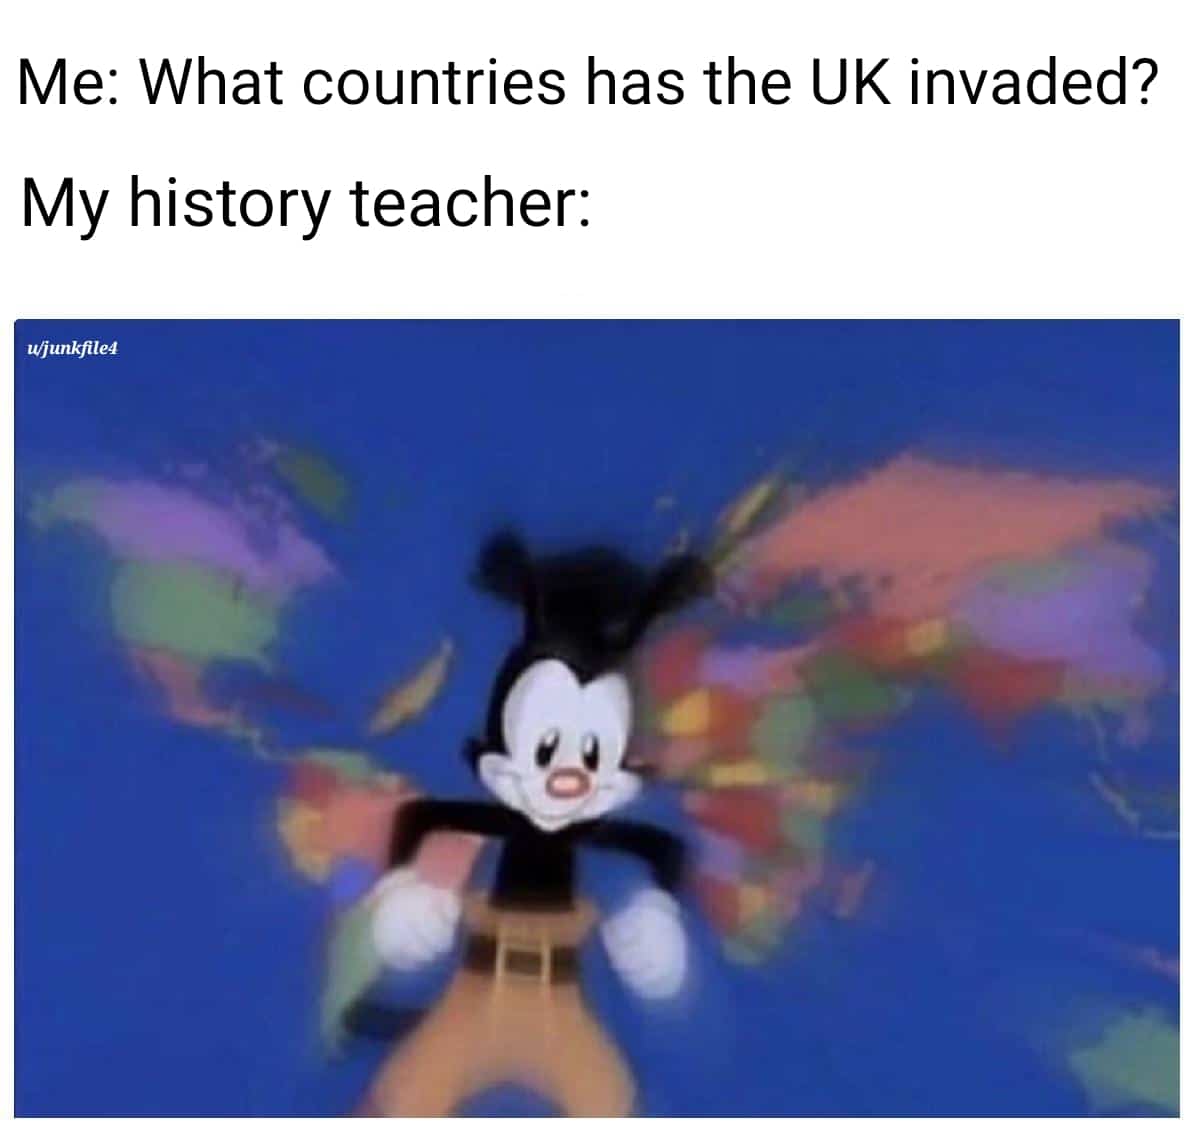 other other-memes other text: Me: What countries has the UK invaded? My history teacher: u/junkfile4 